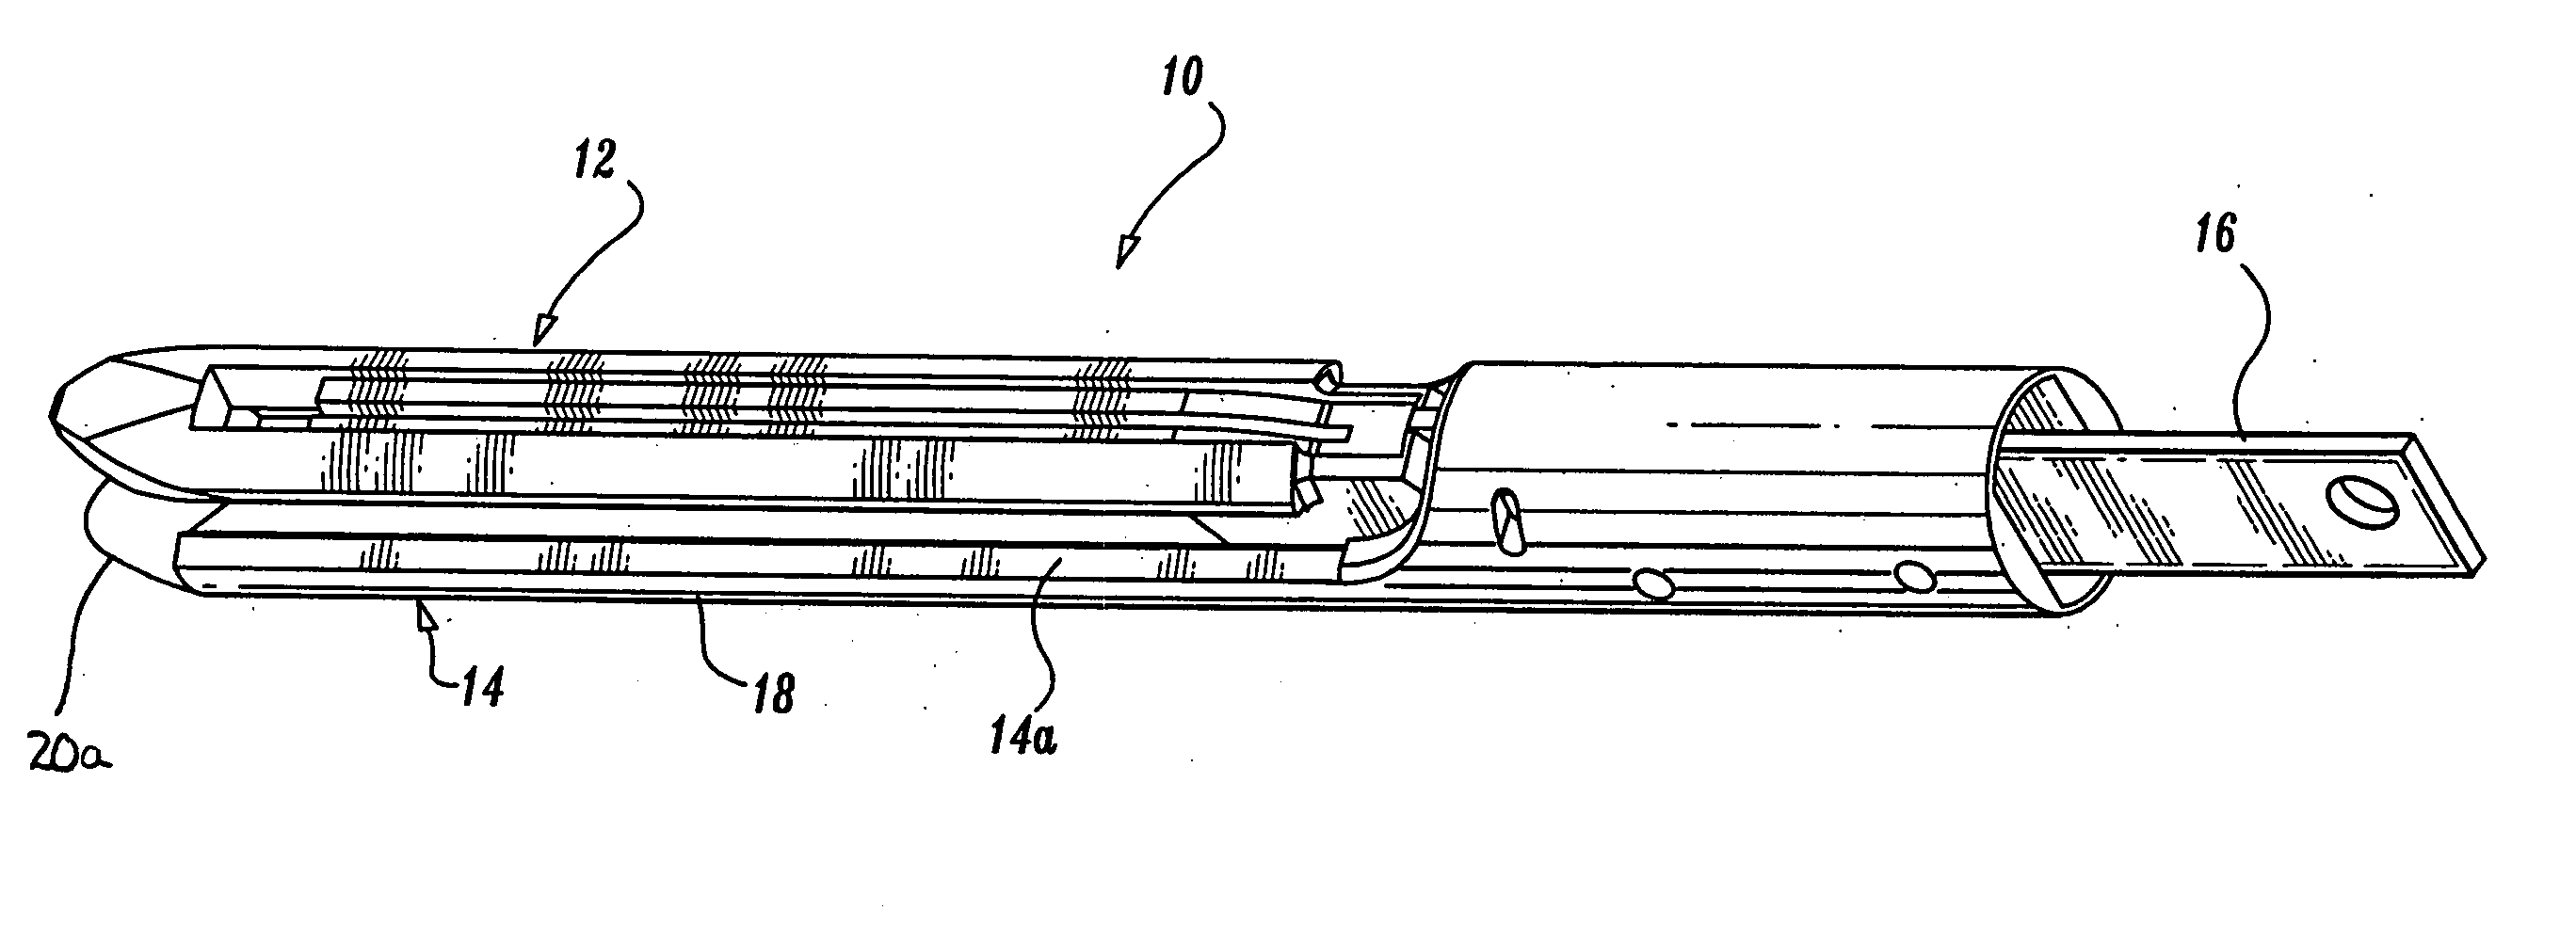 Tool assembly for surgical stapling device